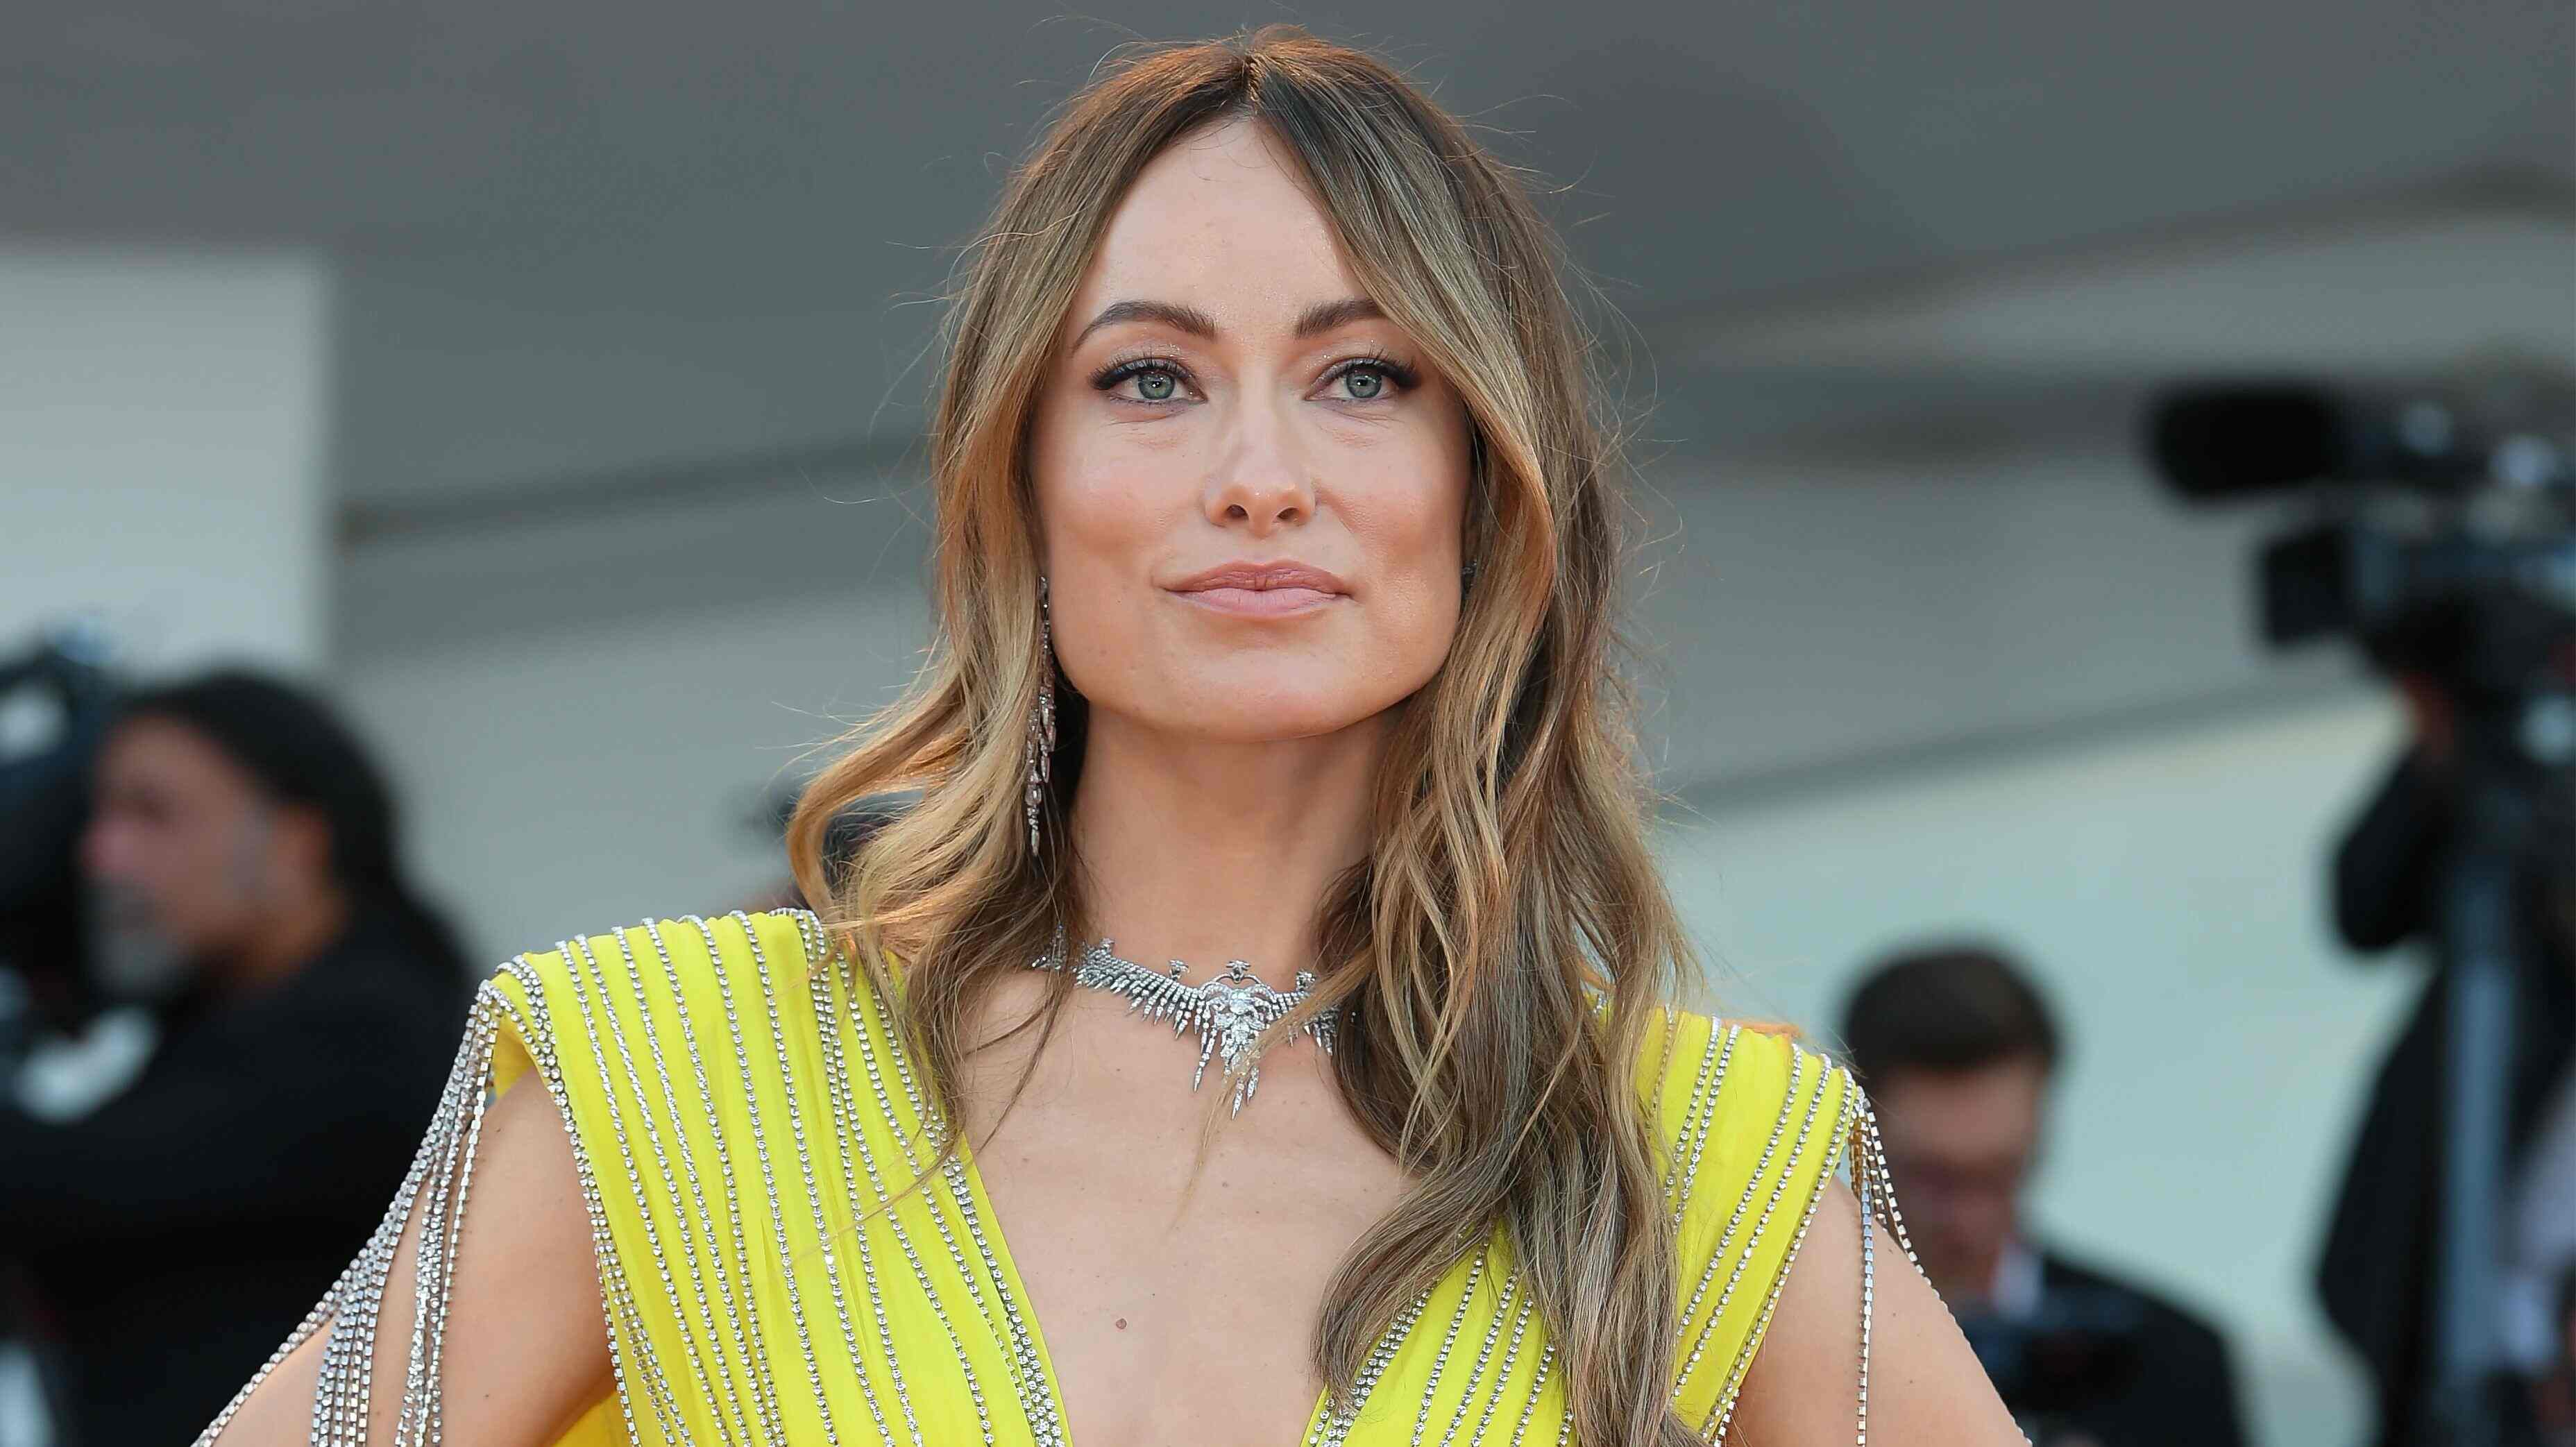 Olivia Wilde’s Controversial Climate Change Post Ignites Social Media Criticism